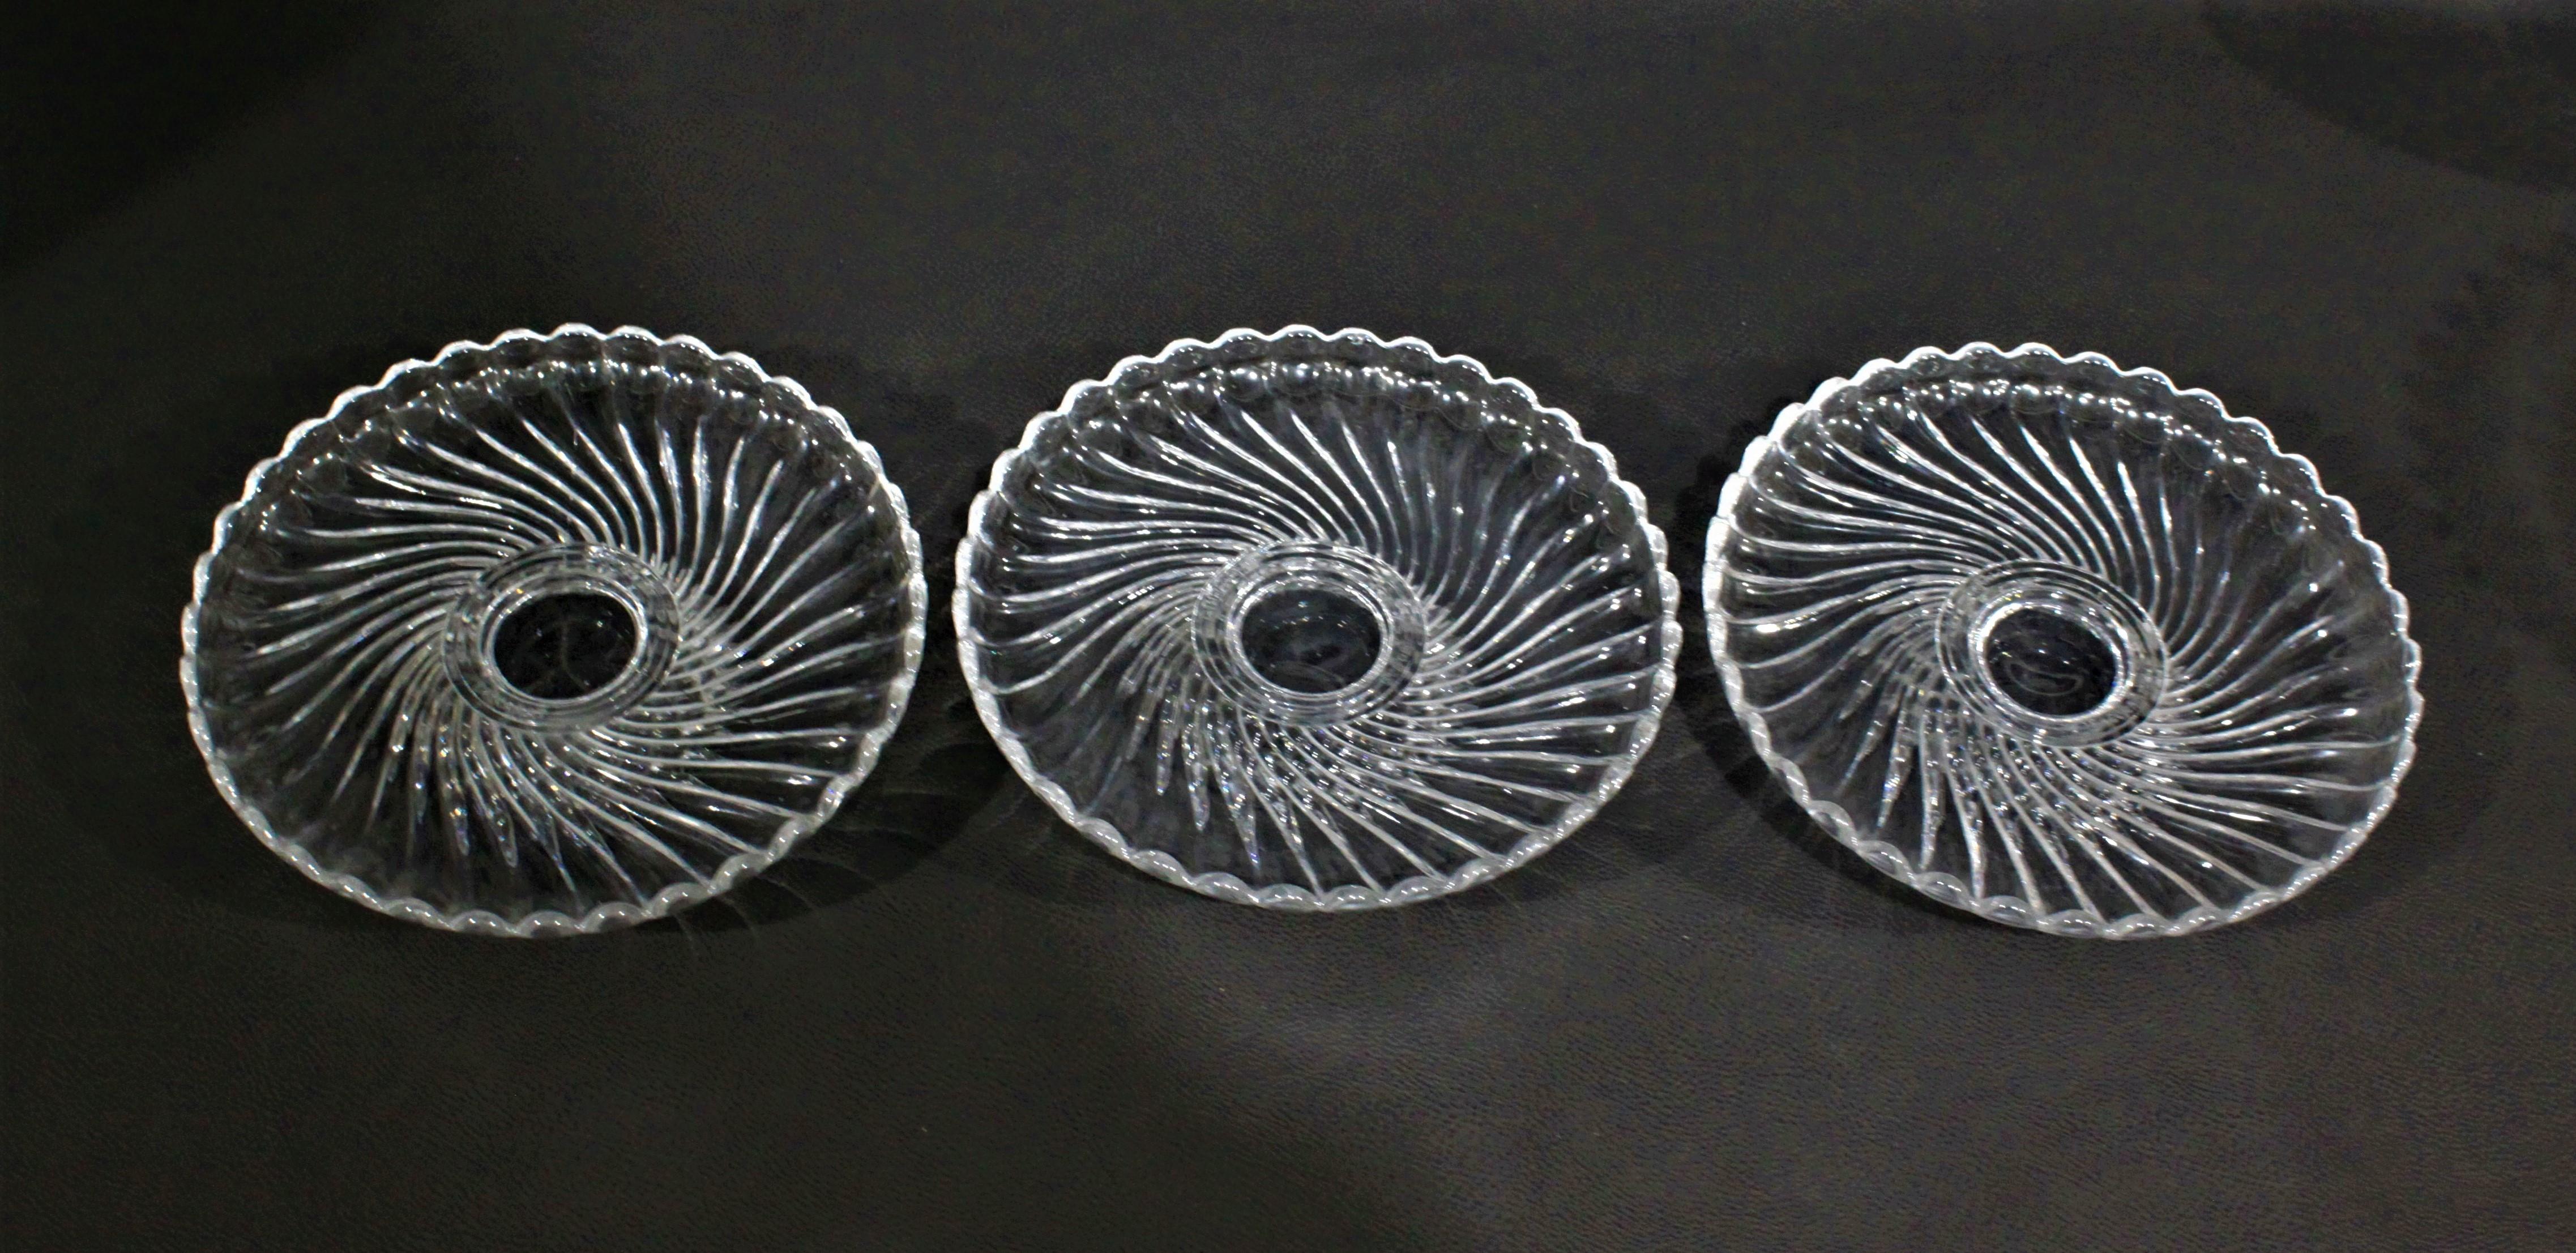 This set of five swirled crystal pedestal cake stands or servers date from the Late 19th Century and made by Baccarat of France. The swirled pattern displayed in surface areas of each piece is replicated in the bases. The set is composed of two